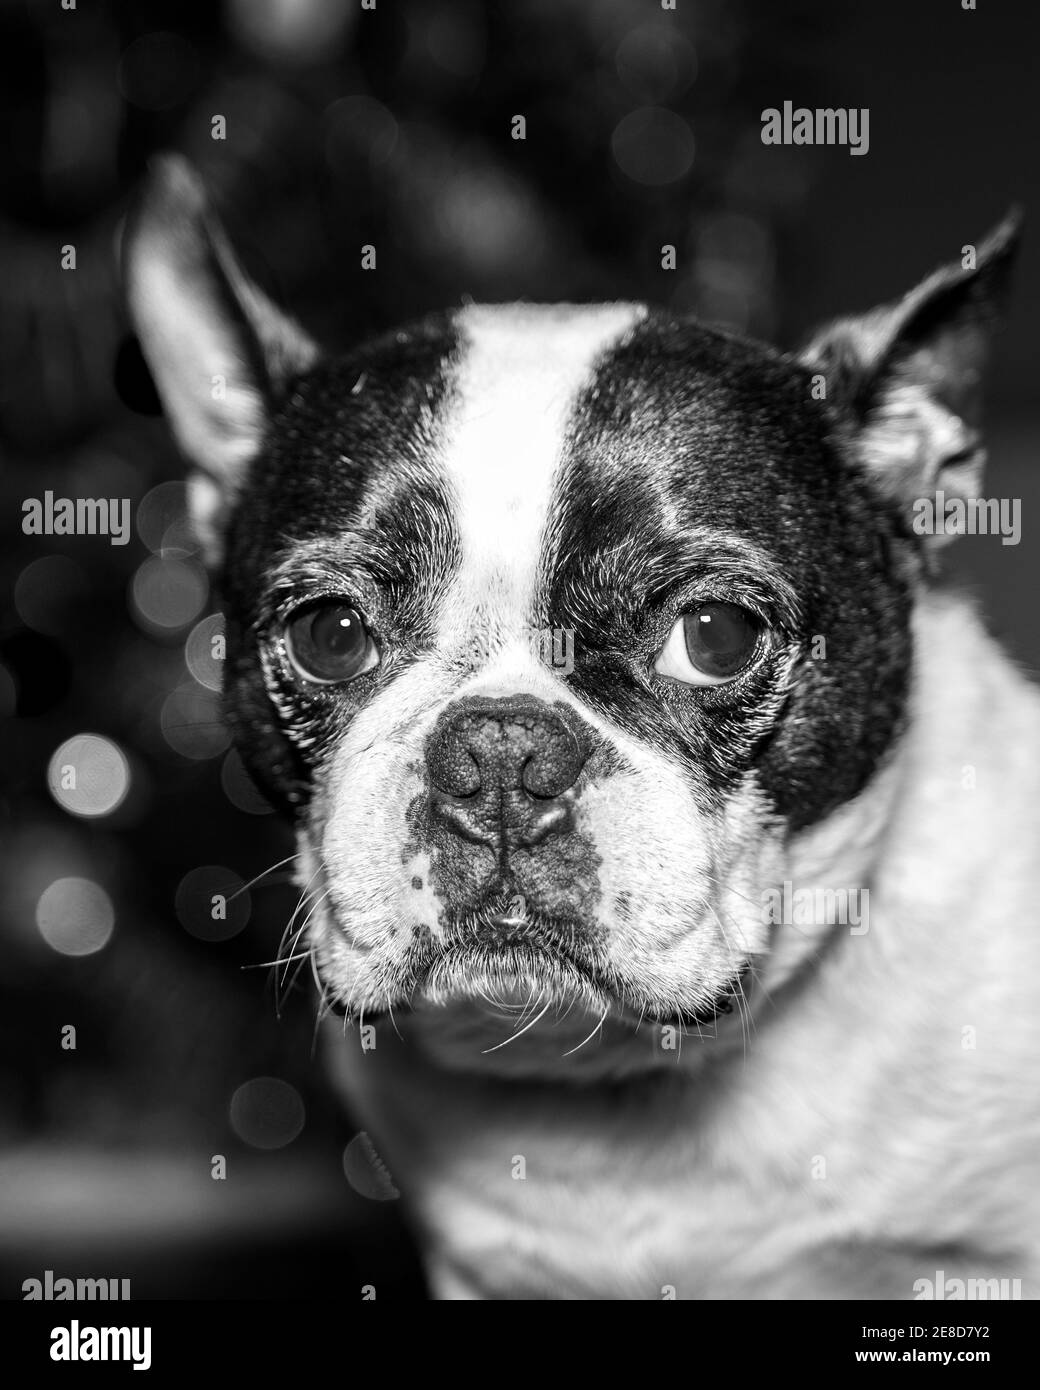 Brindle Boston Terrier High Resolution Stock Photography and Images - Alamy